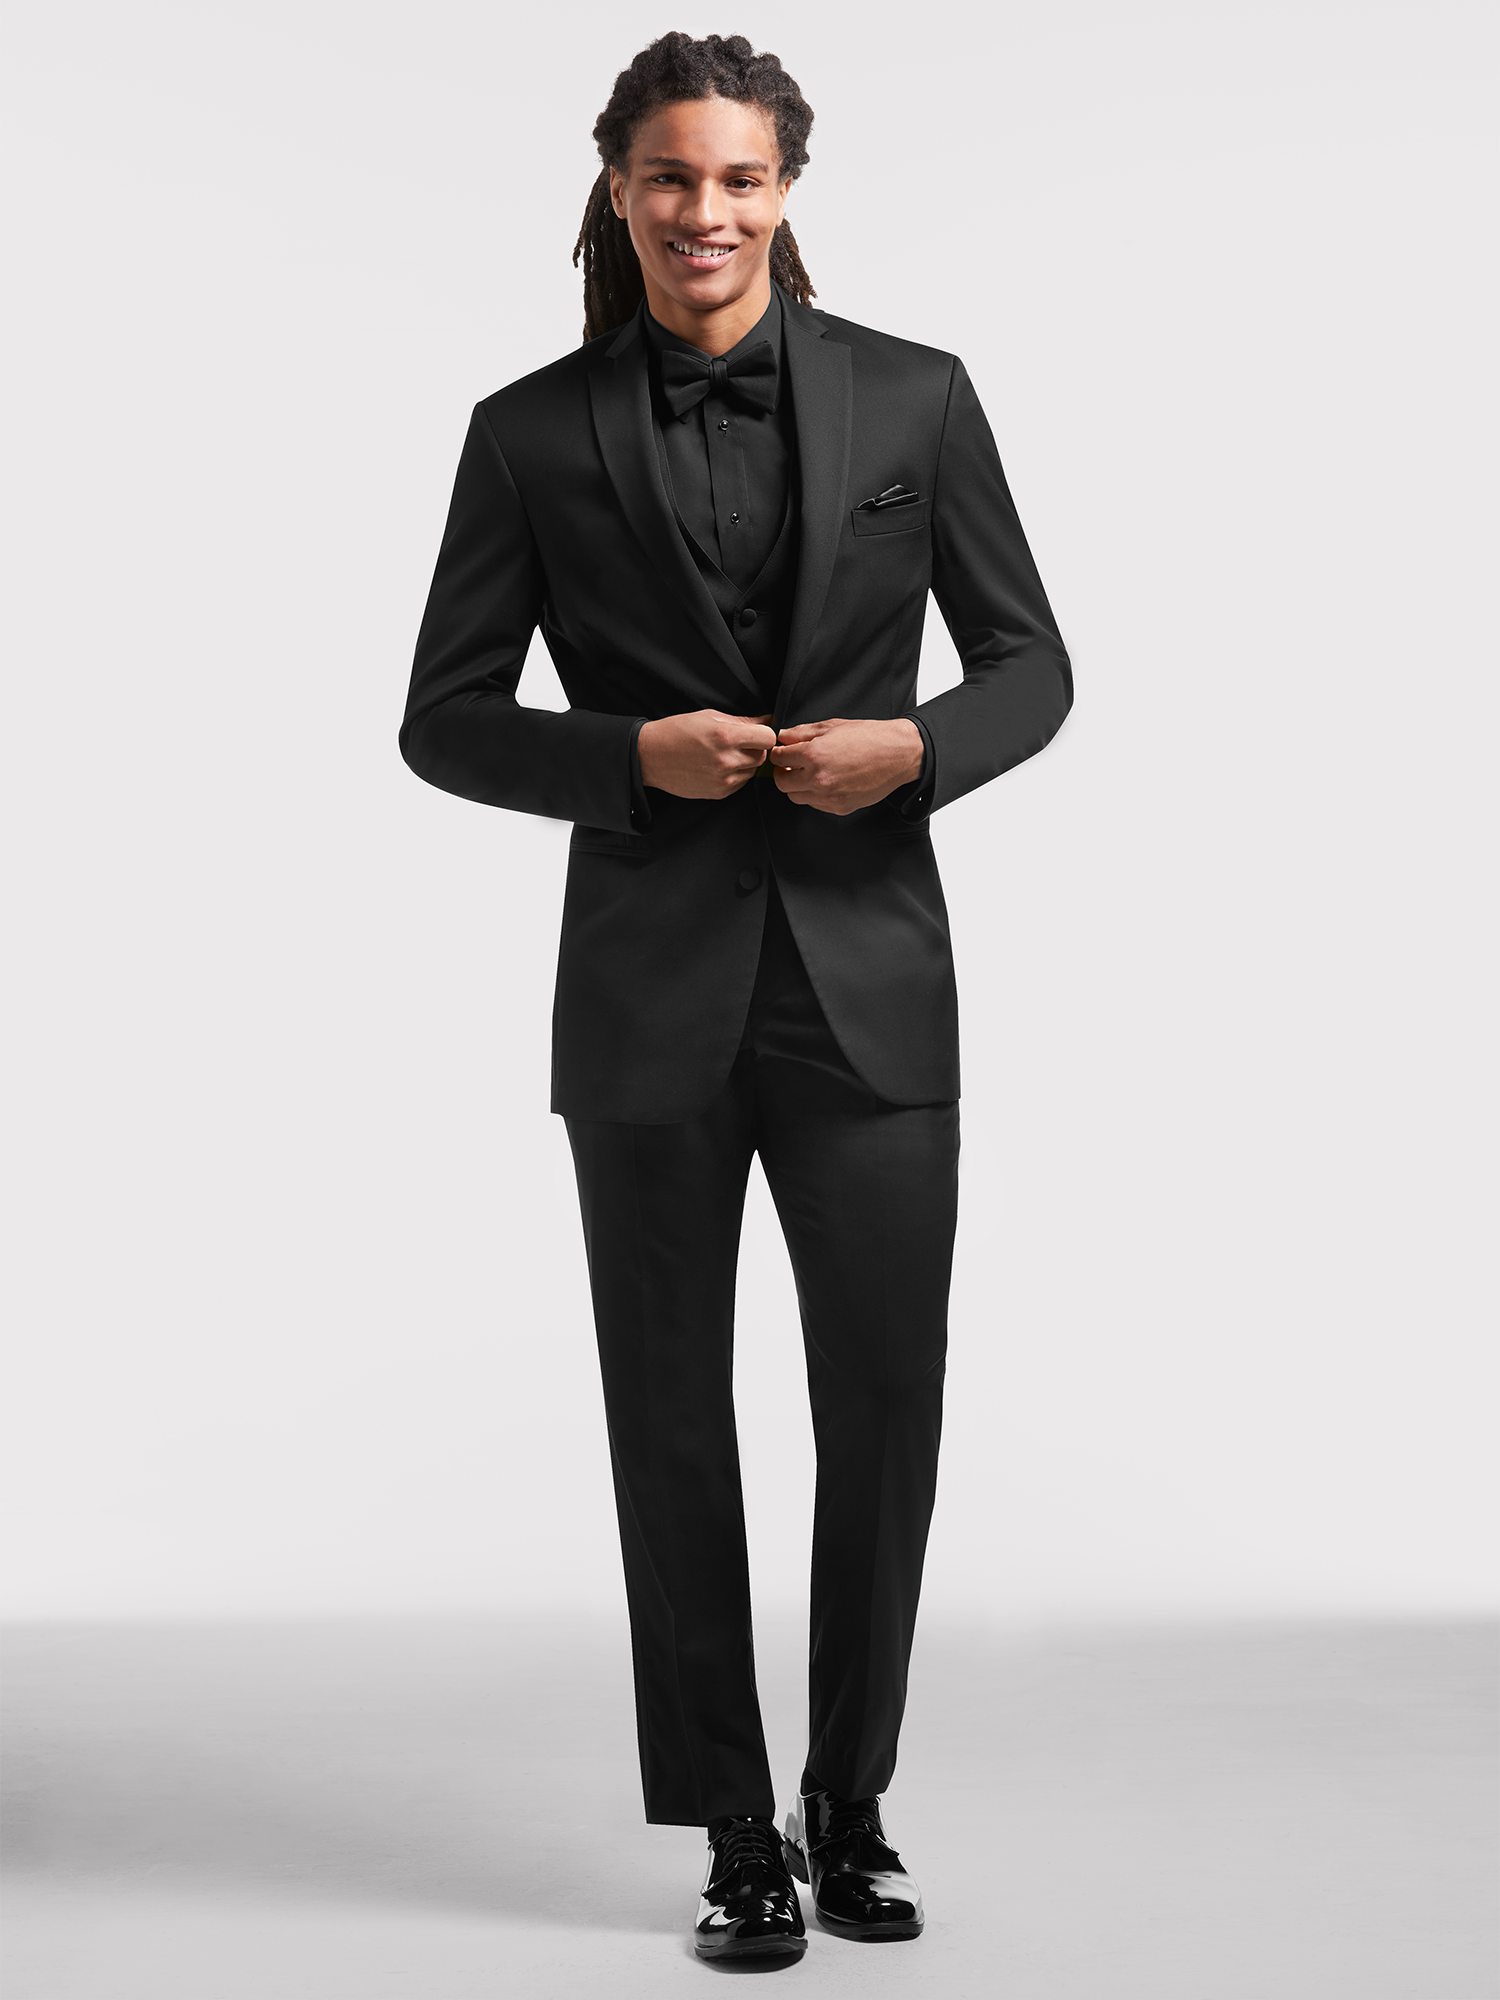 black and gold prom tuxedo